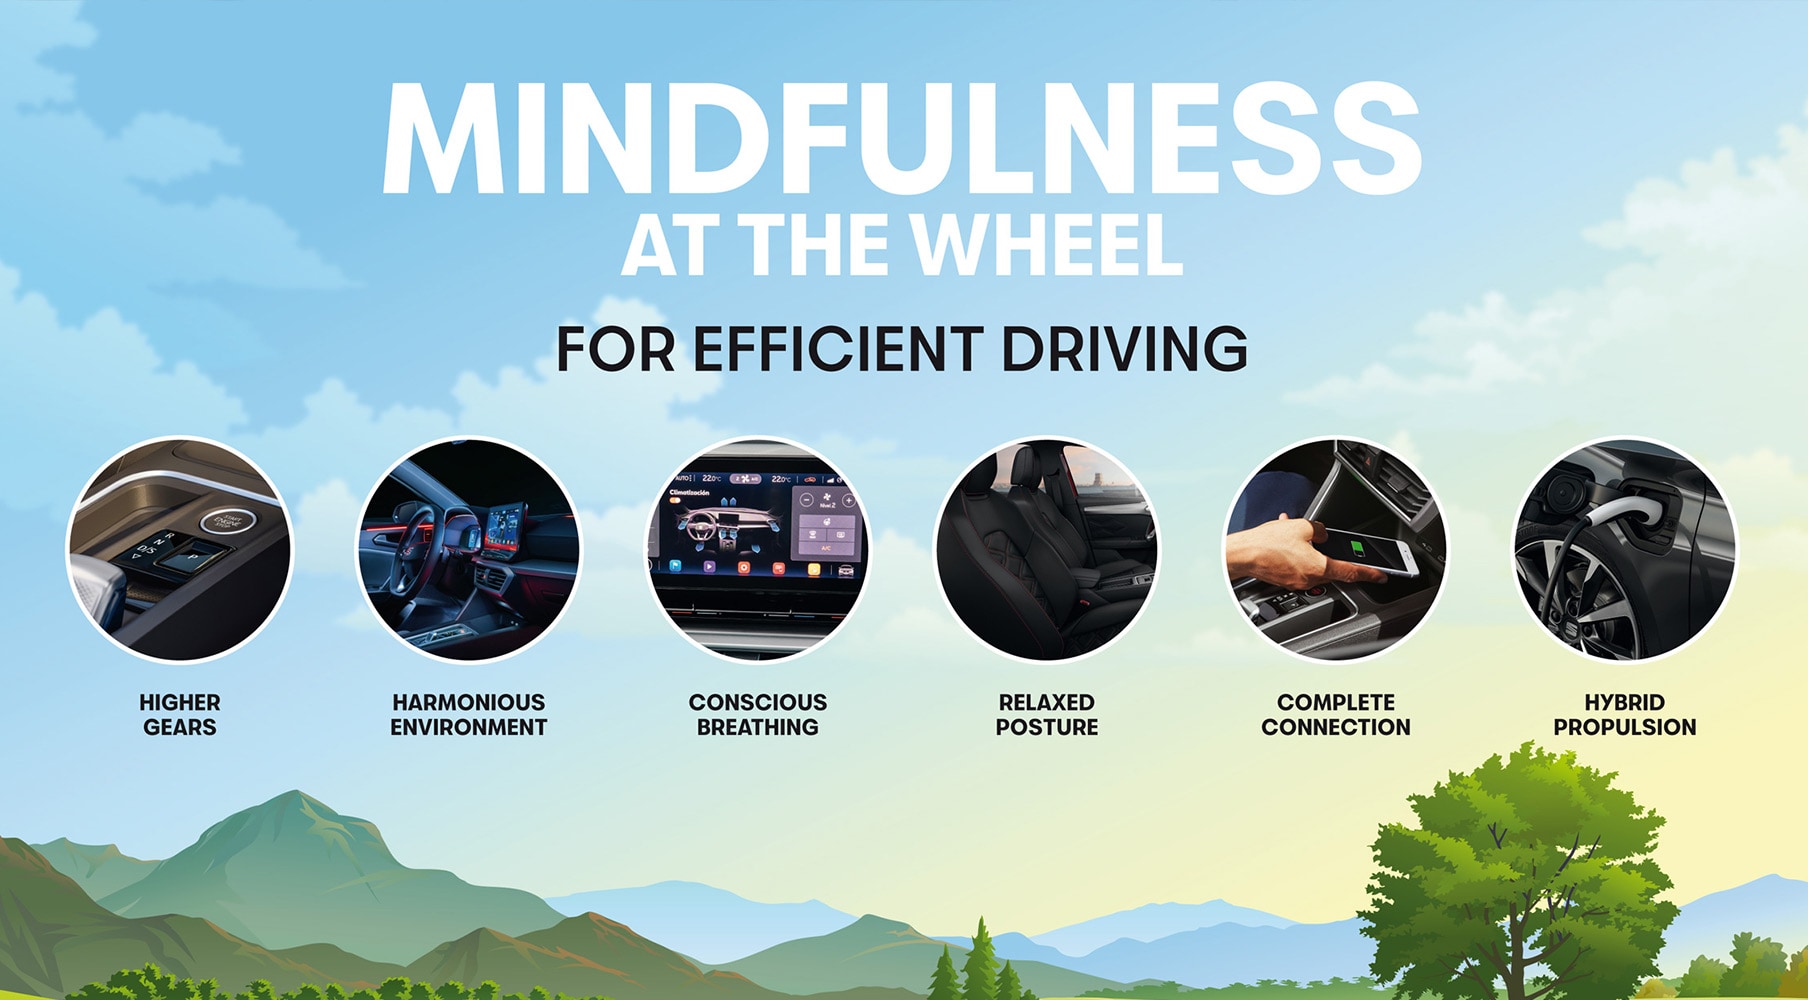 Mindfulness at the wheel